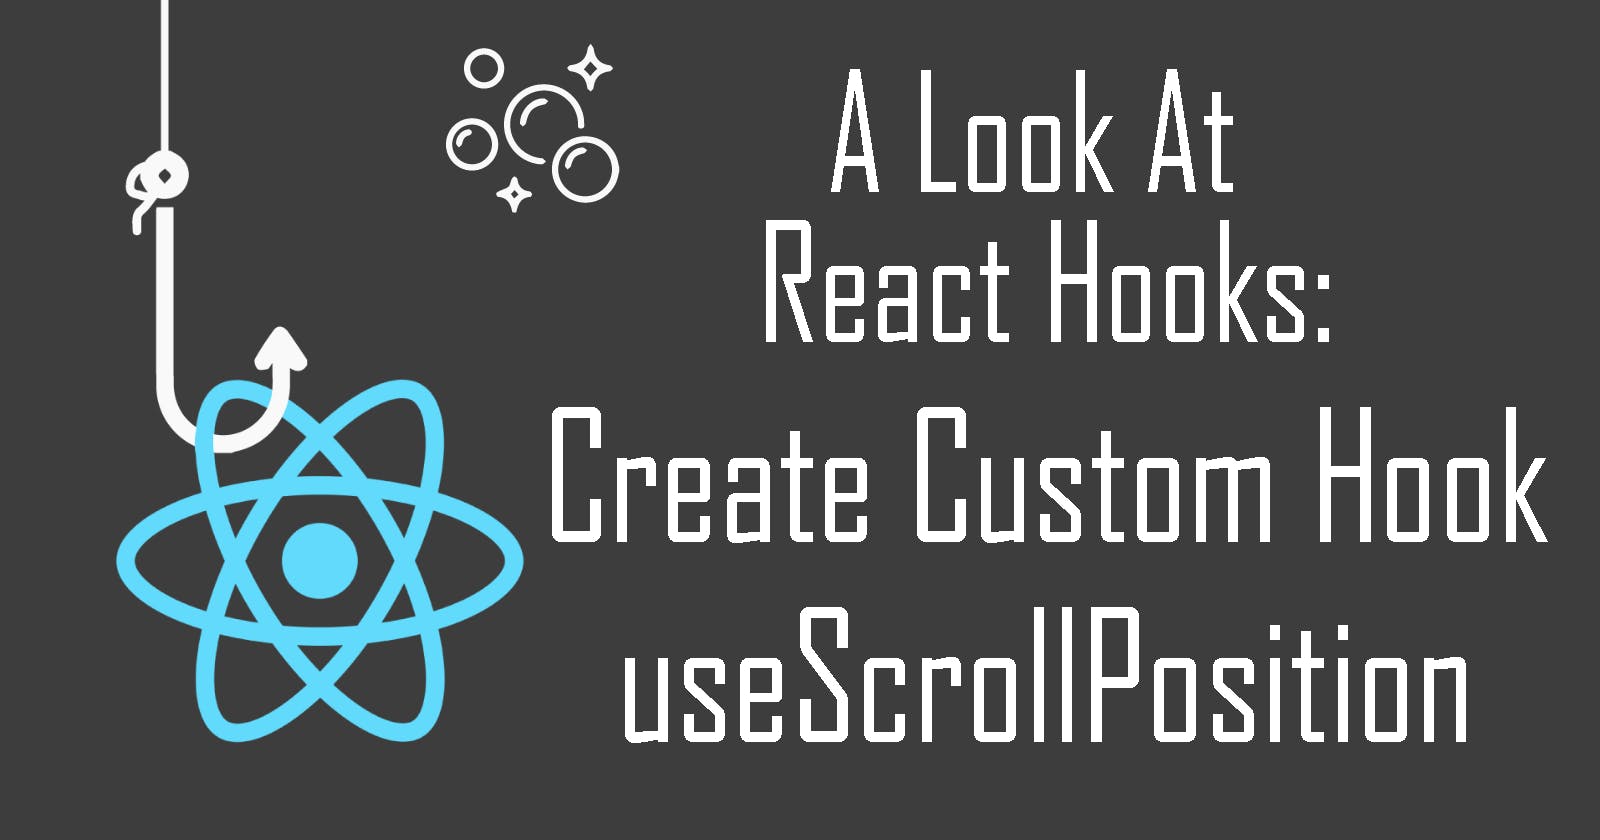 A Look At React Hooks: useScrollPosition for Parallax Scrolling Effects